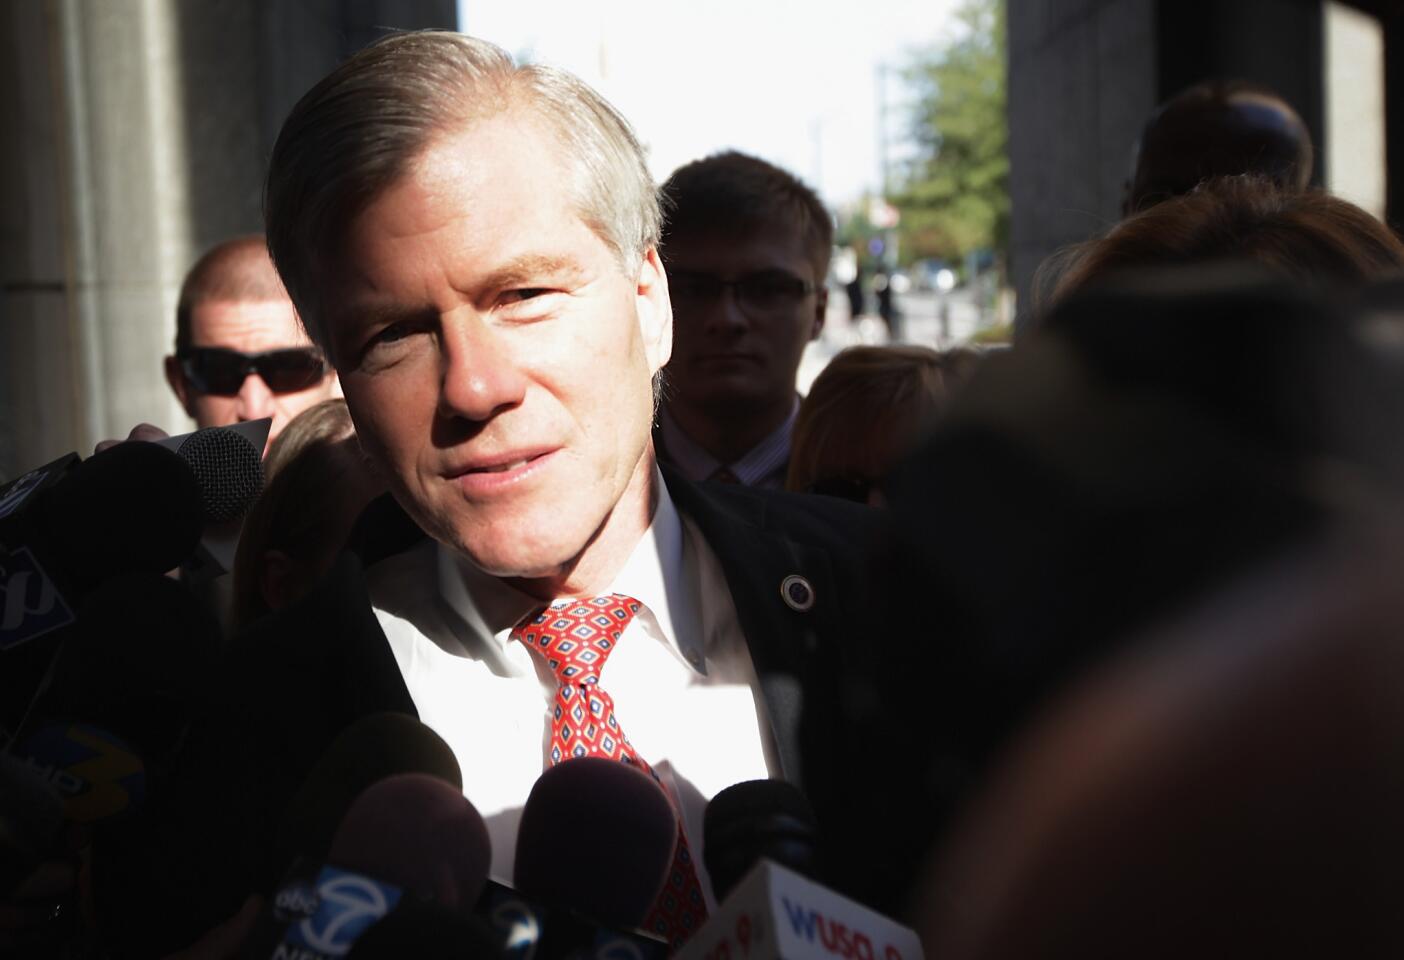 Corruption Trial Of Former Virginia Governor McDonnell And His Wife Continues In Richmond